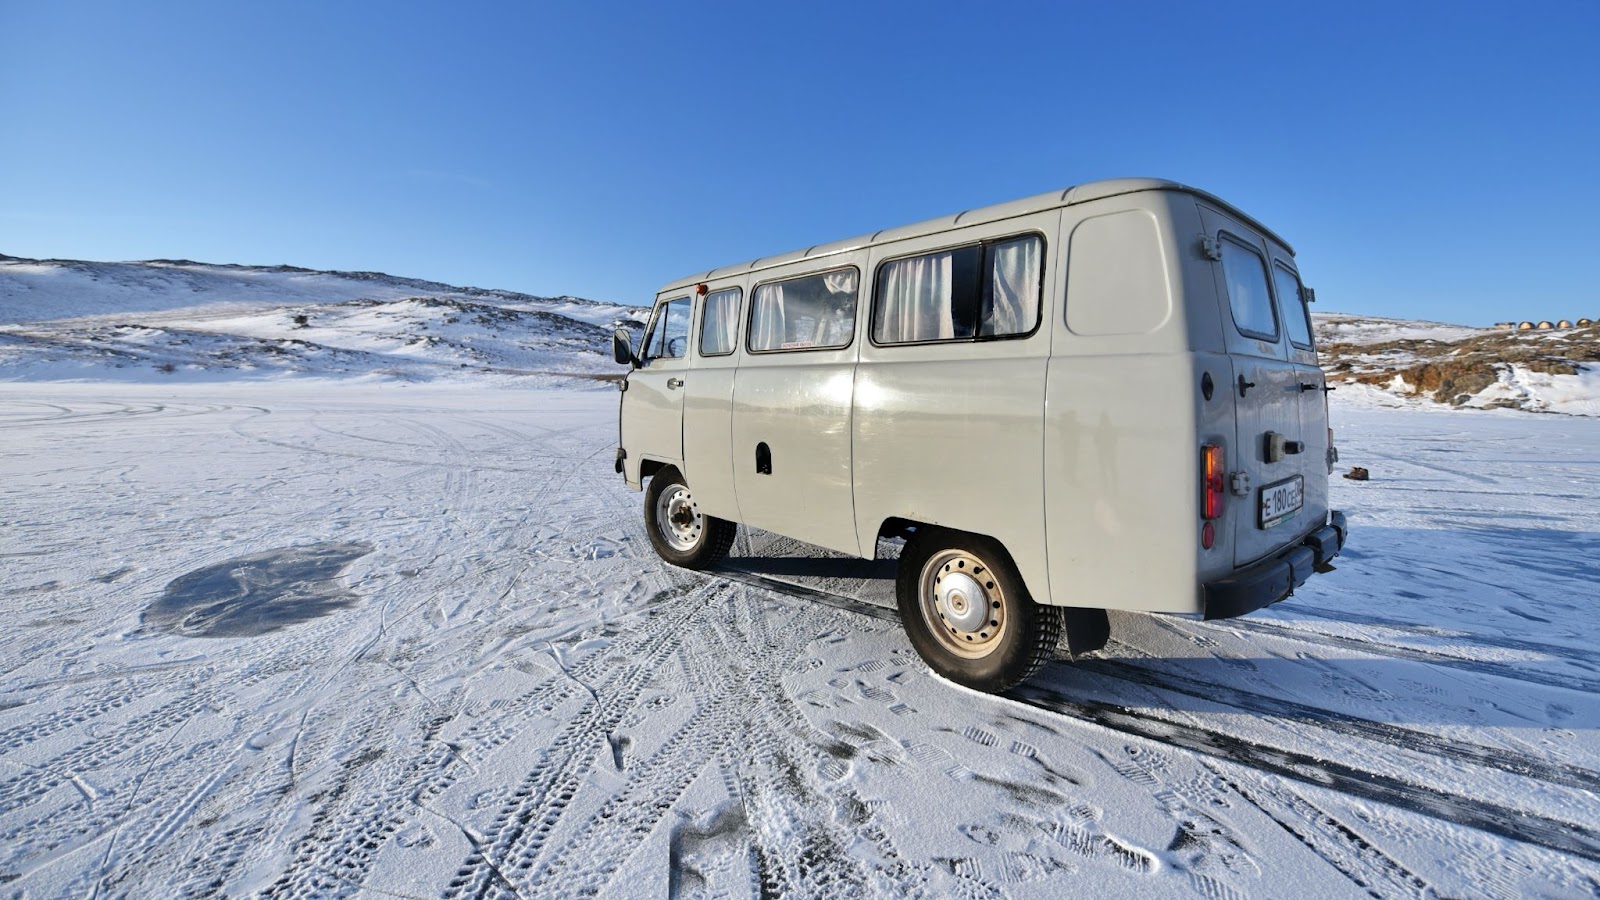 Campervan in the snow